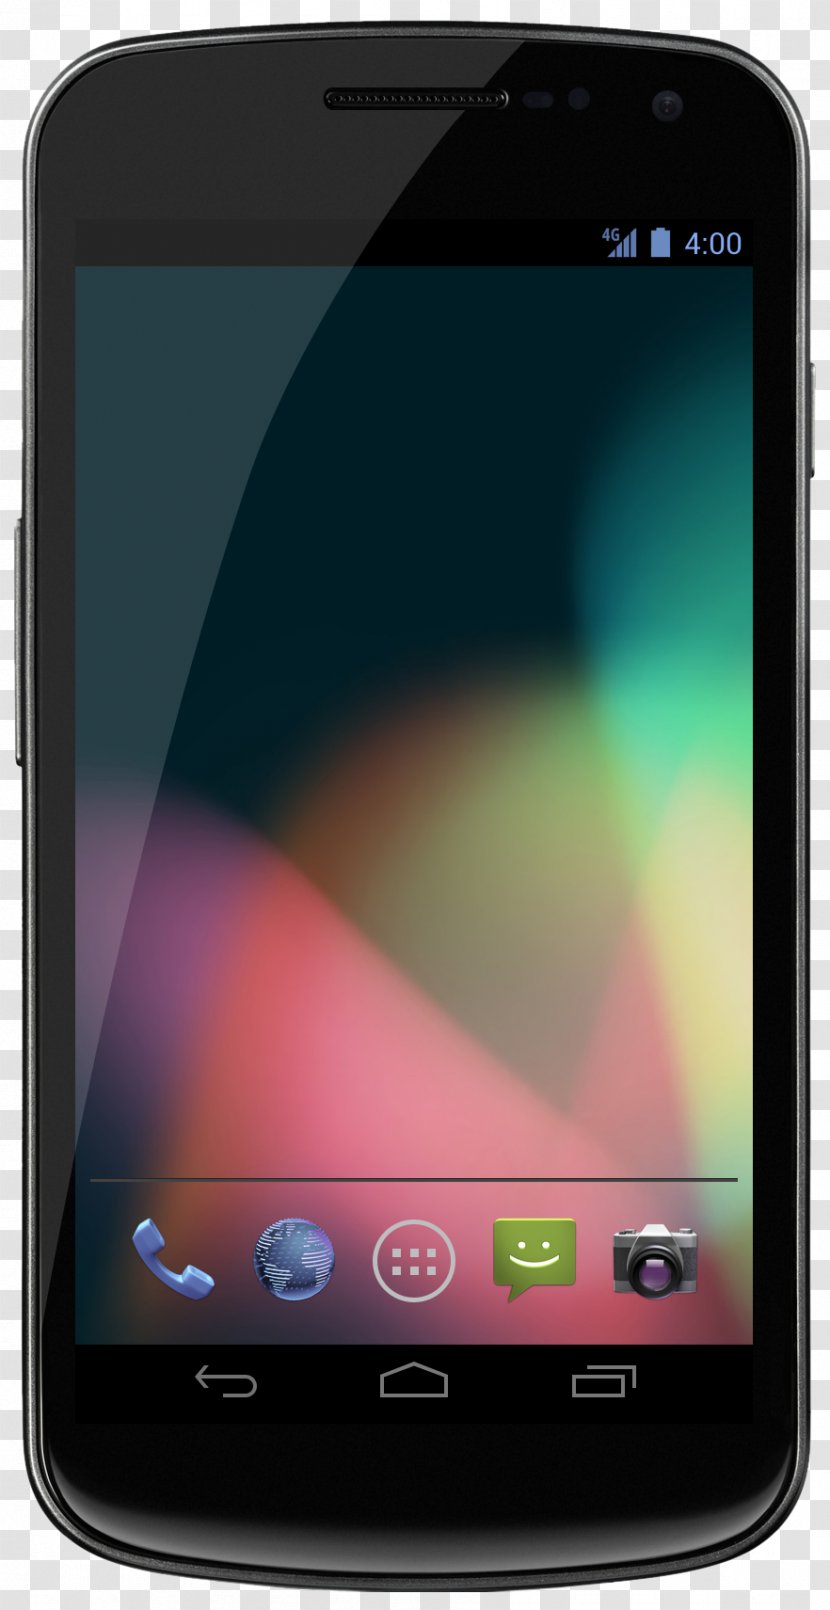 Nexus S One 4 Galaxy Android - Google - Smartphone Transparent PNG